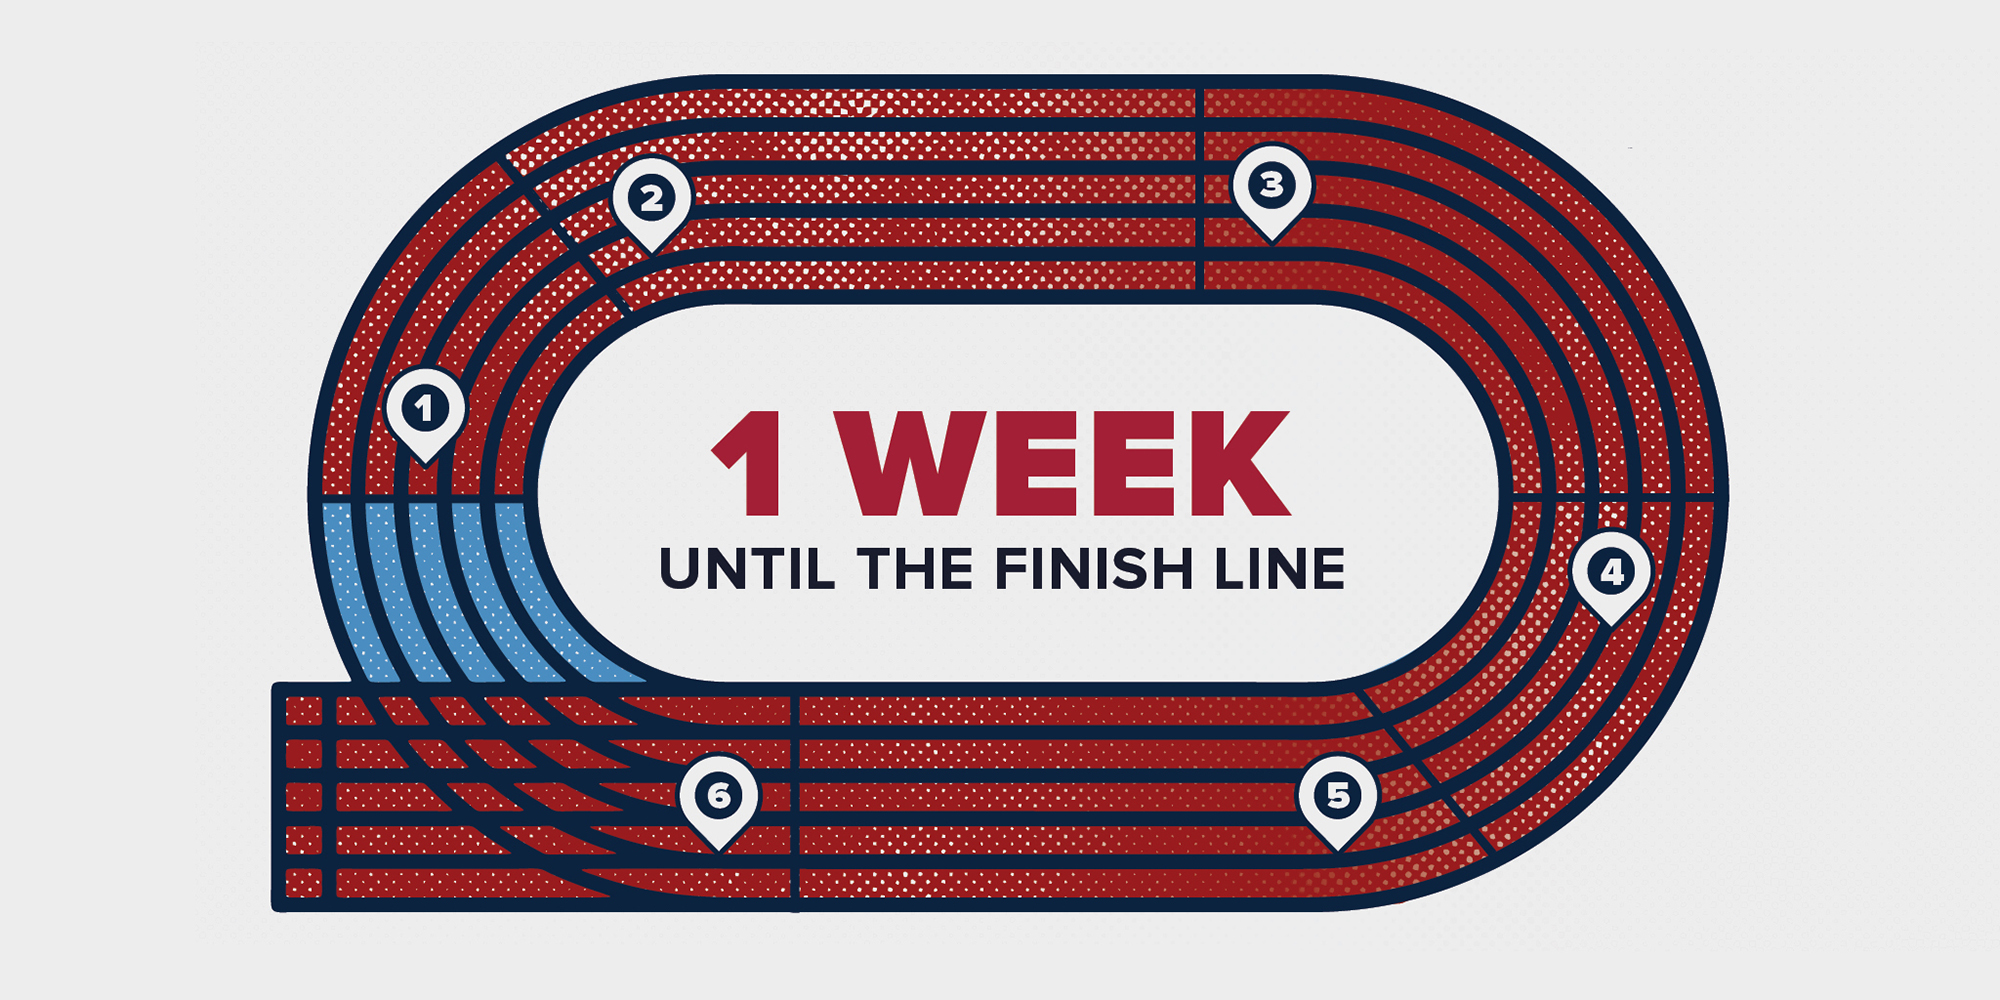 1 week until the finish line